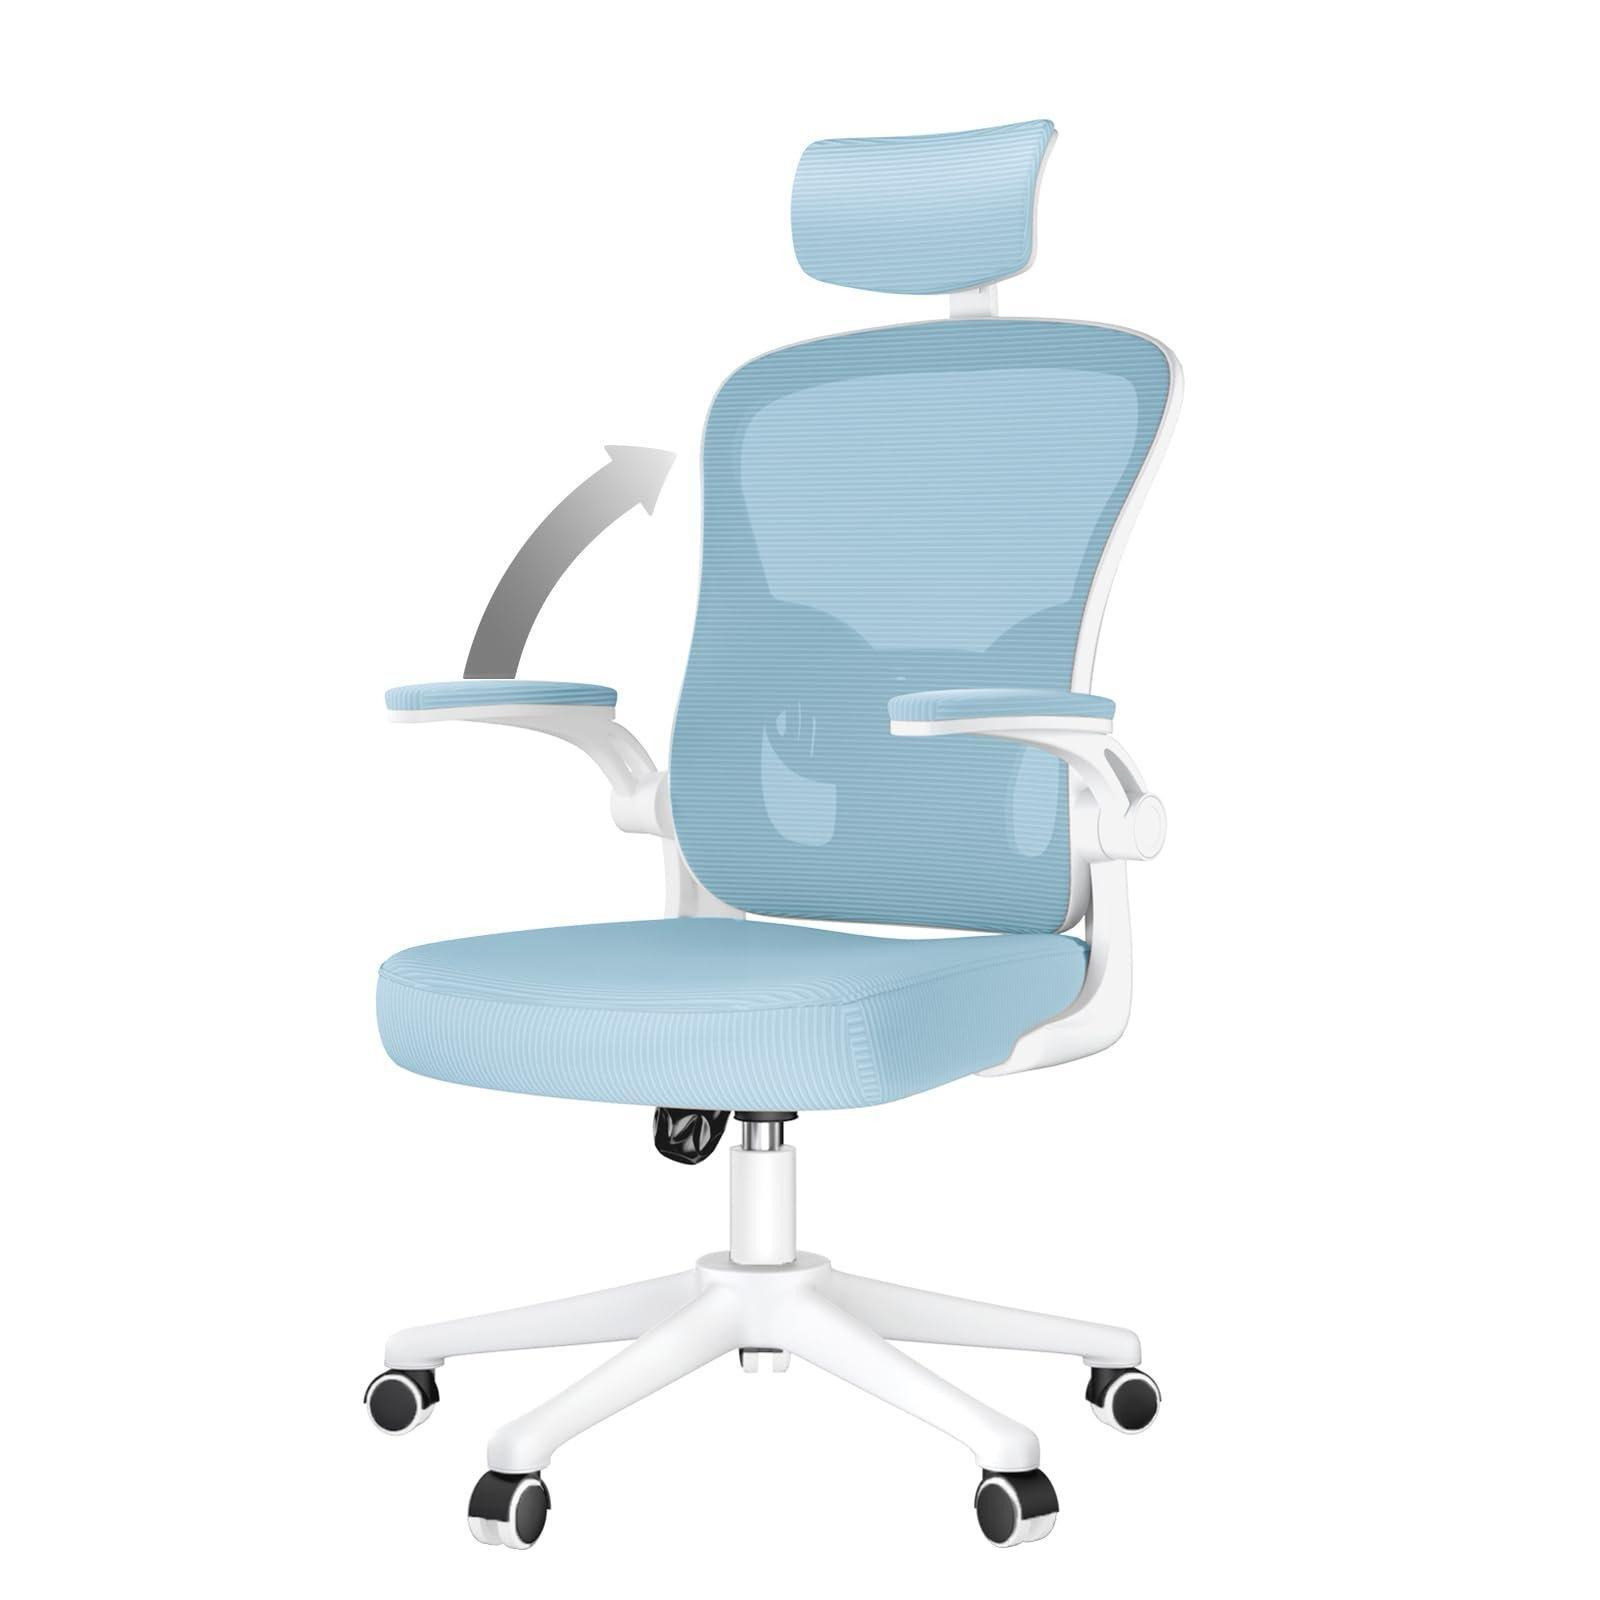 Ergonomic Computer Chair with 90° Flip-Up Armrest, Adjustable Headrest for Home and Office - image 1